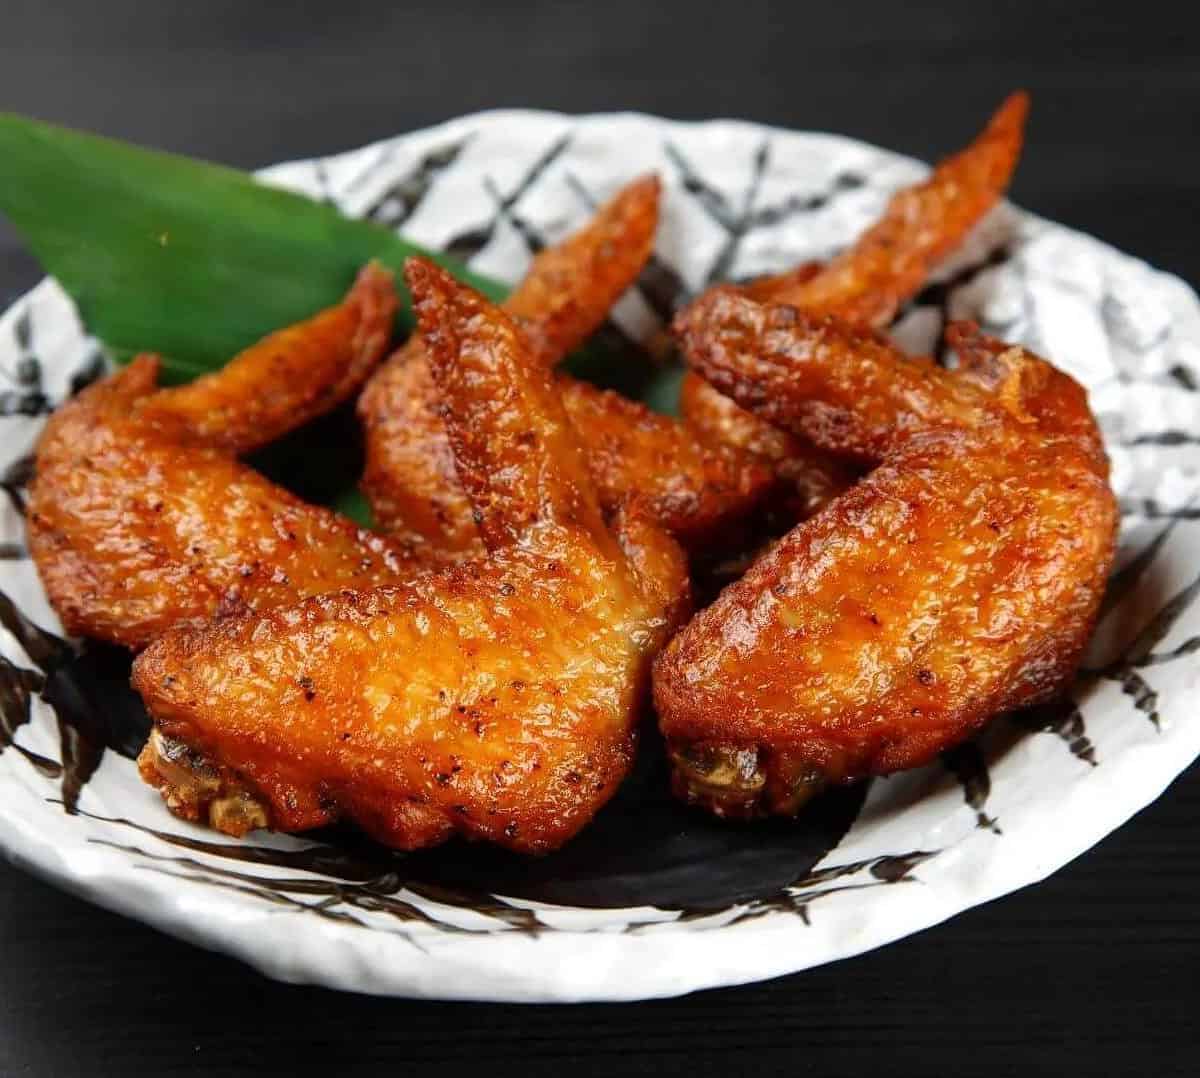  Are you a fan of Japanese fried chicken? These tebasaki wings are the ultimate explosion of flavour.